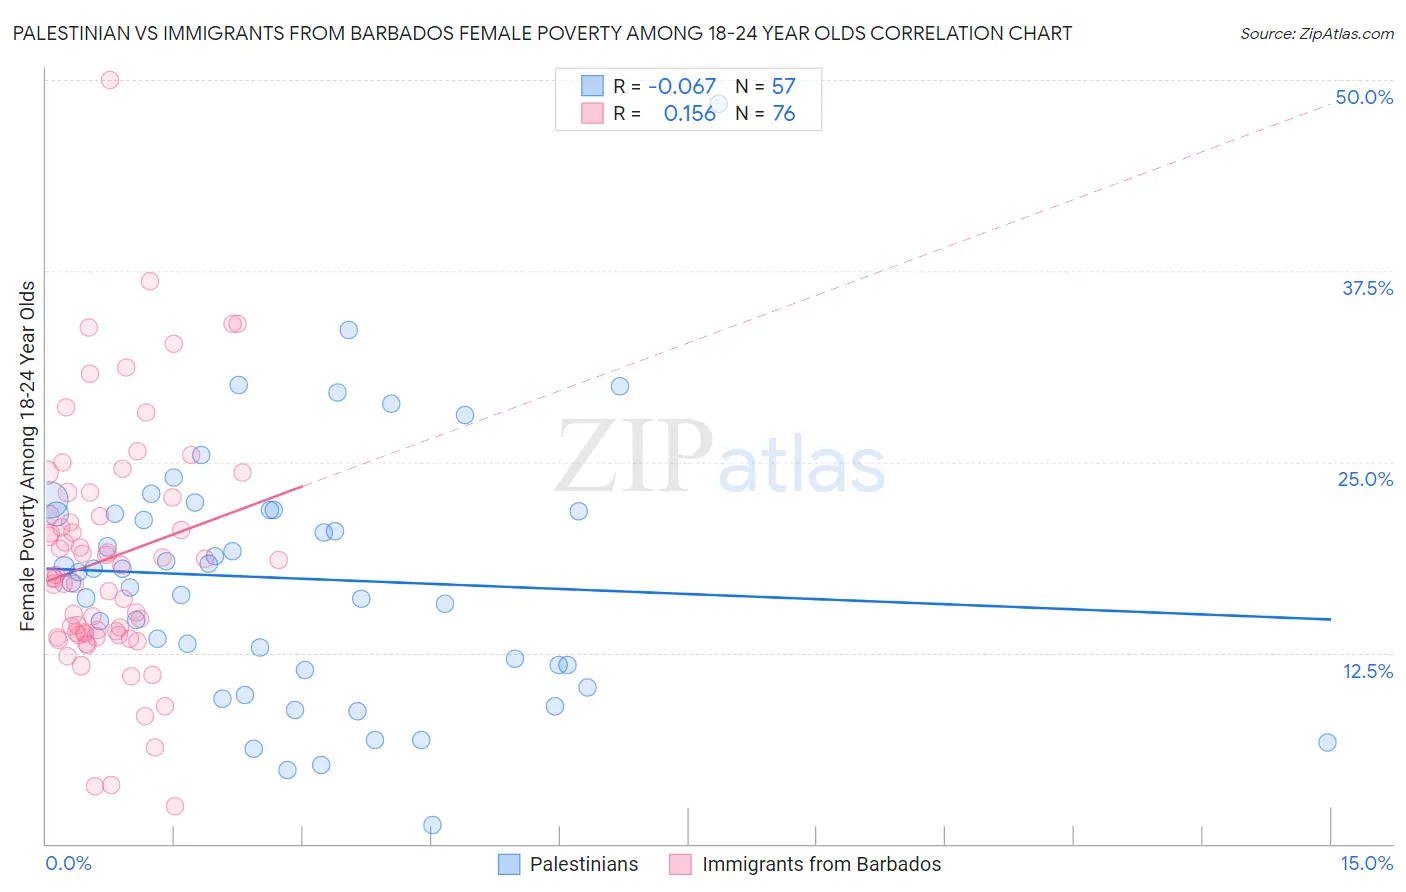 Palestinian vs Immigrants from Barbados Female Poverty Among 18-24 Year Olds